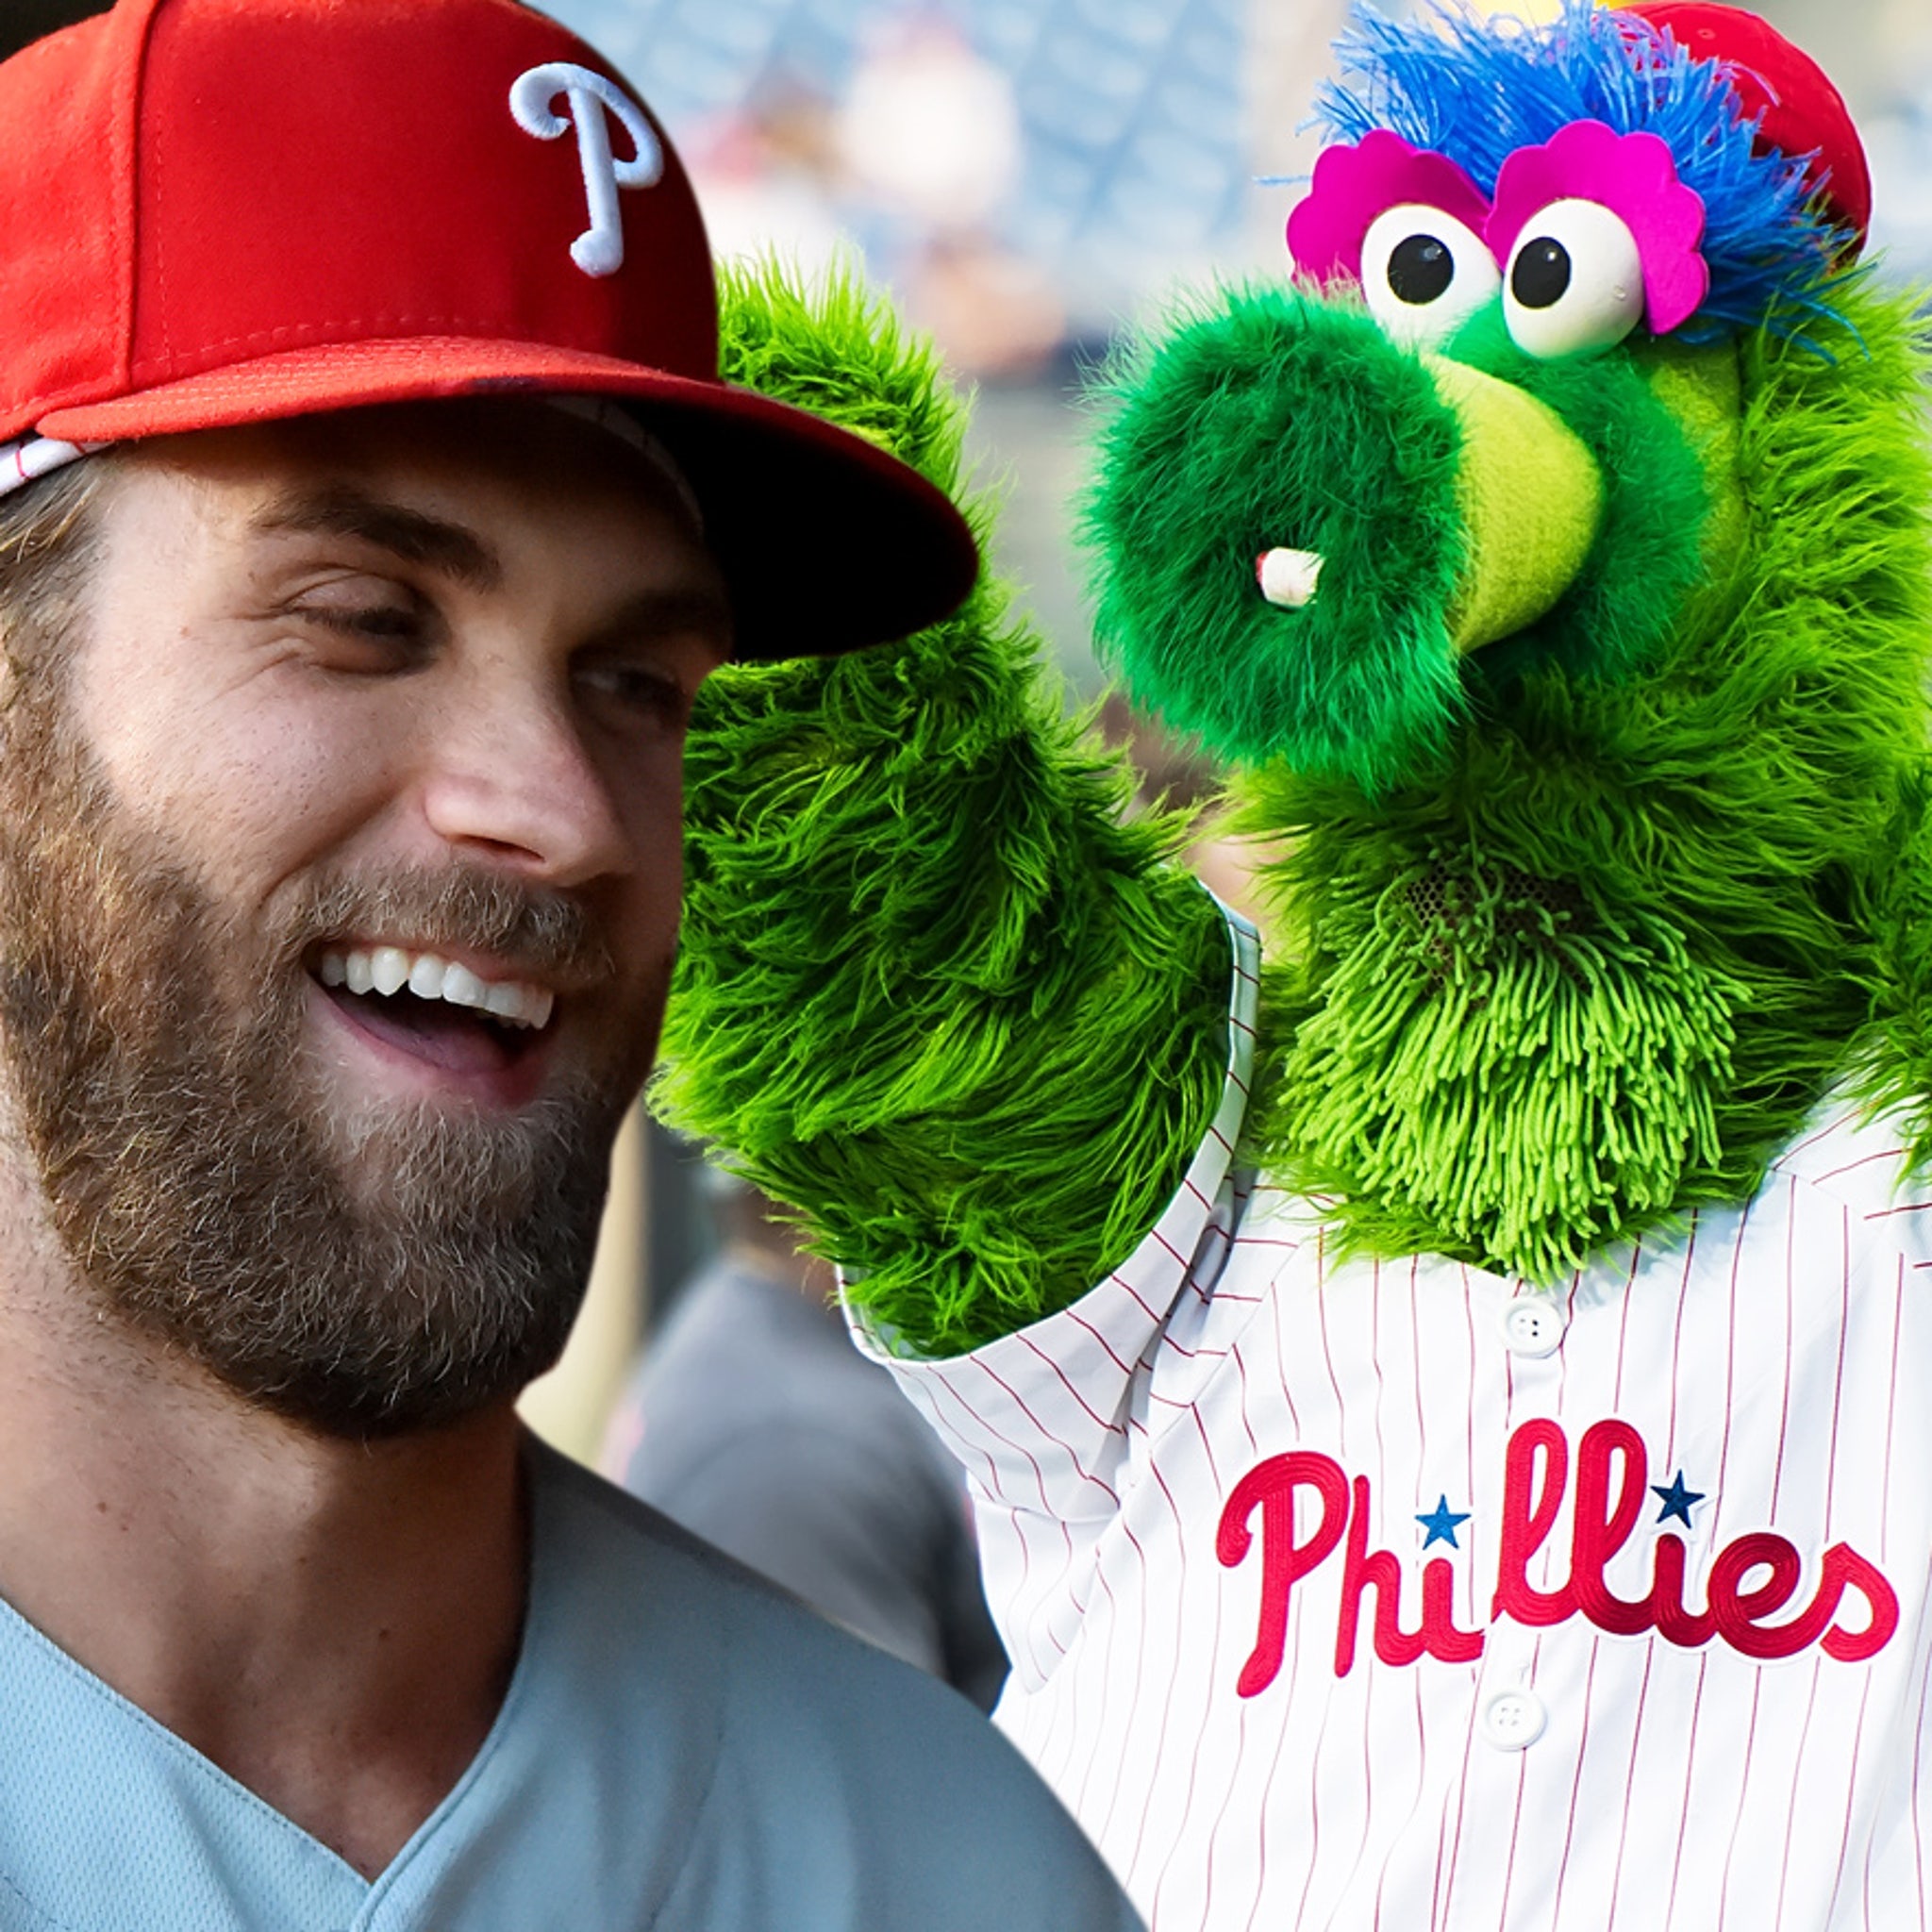 Bryce Harper Rocks Insane Phillie Phanatic Cleats For MLB Opening Day